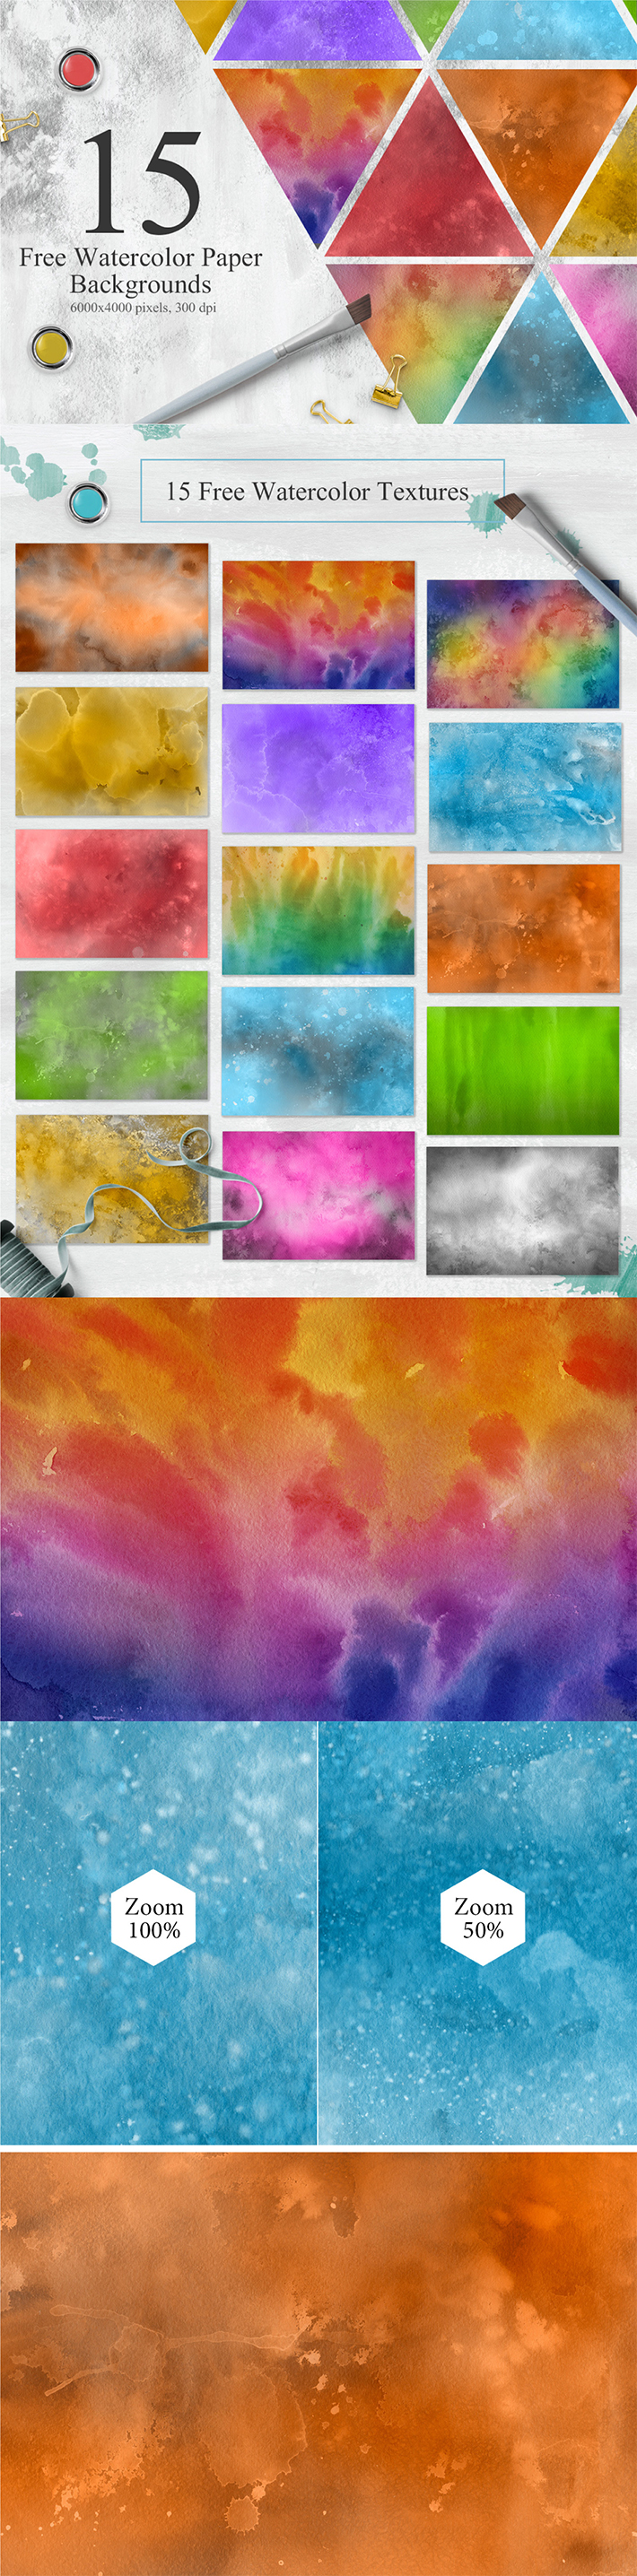 Awesome 15 Watercolor colorful Textures